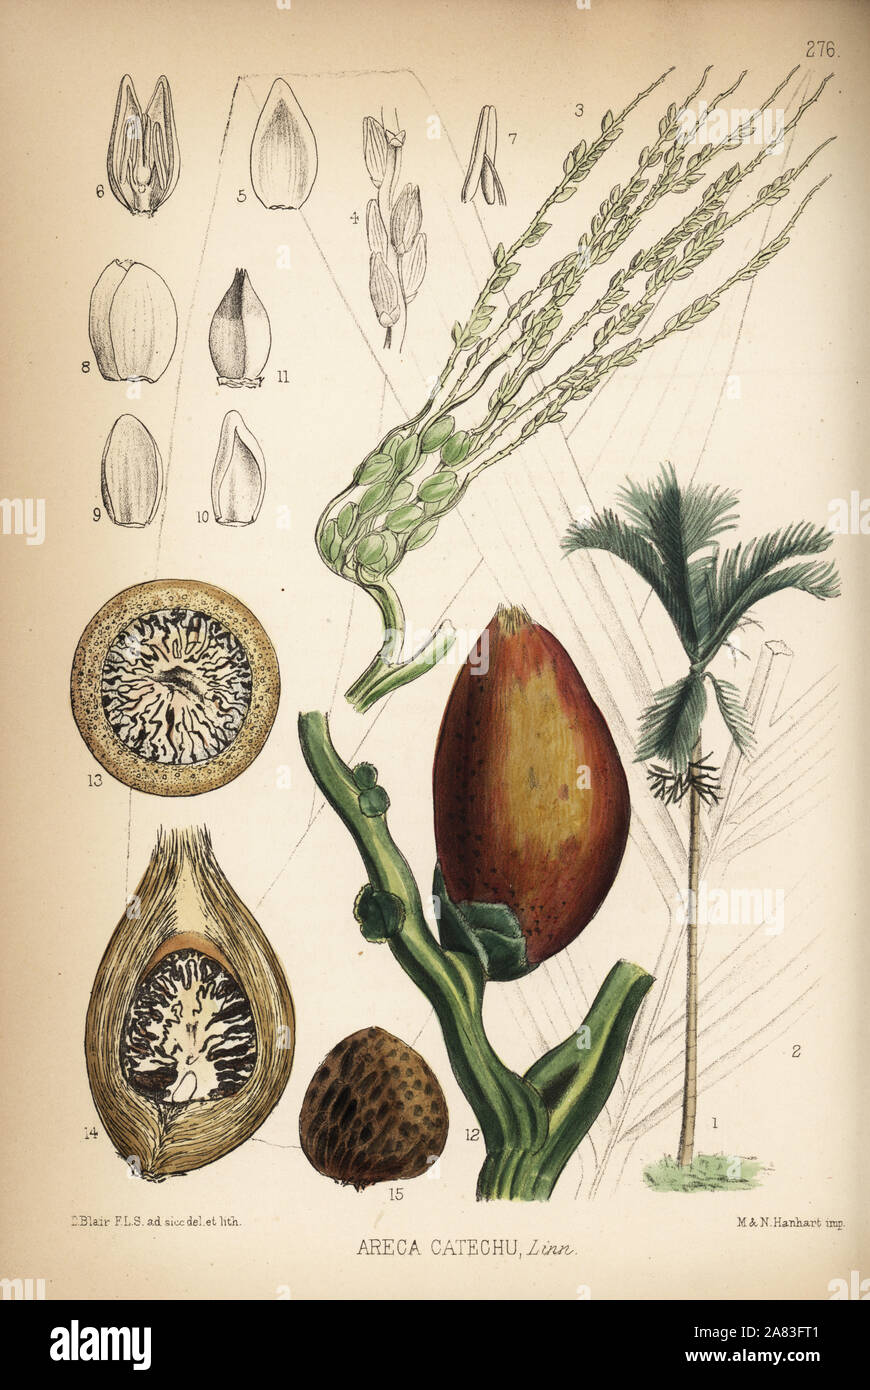 Betelnut palm, goovaka or pinang, Areca catechu. Handcoloured lithograph by Hanhart after a botanical illustration by David Blair from Robert Bentley and Henry Trimen's Medicinal Plants, London, 1880. Stock Photo